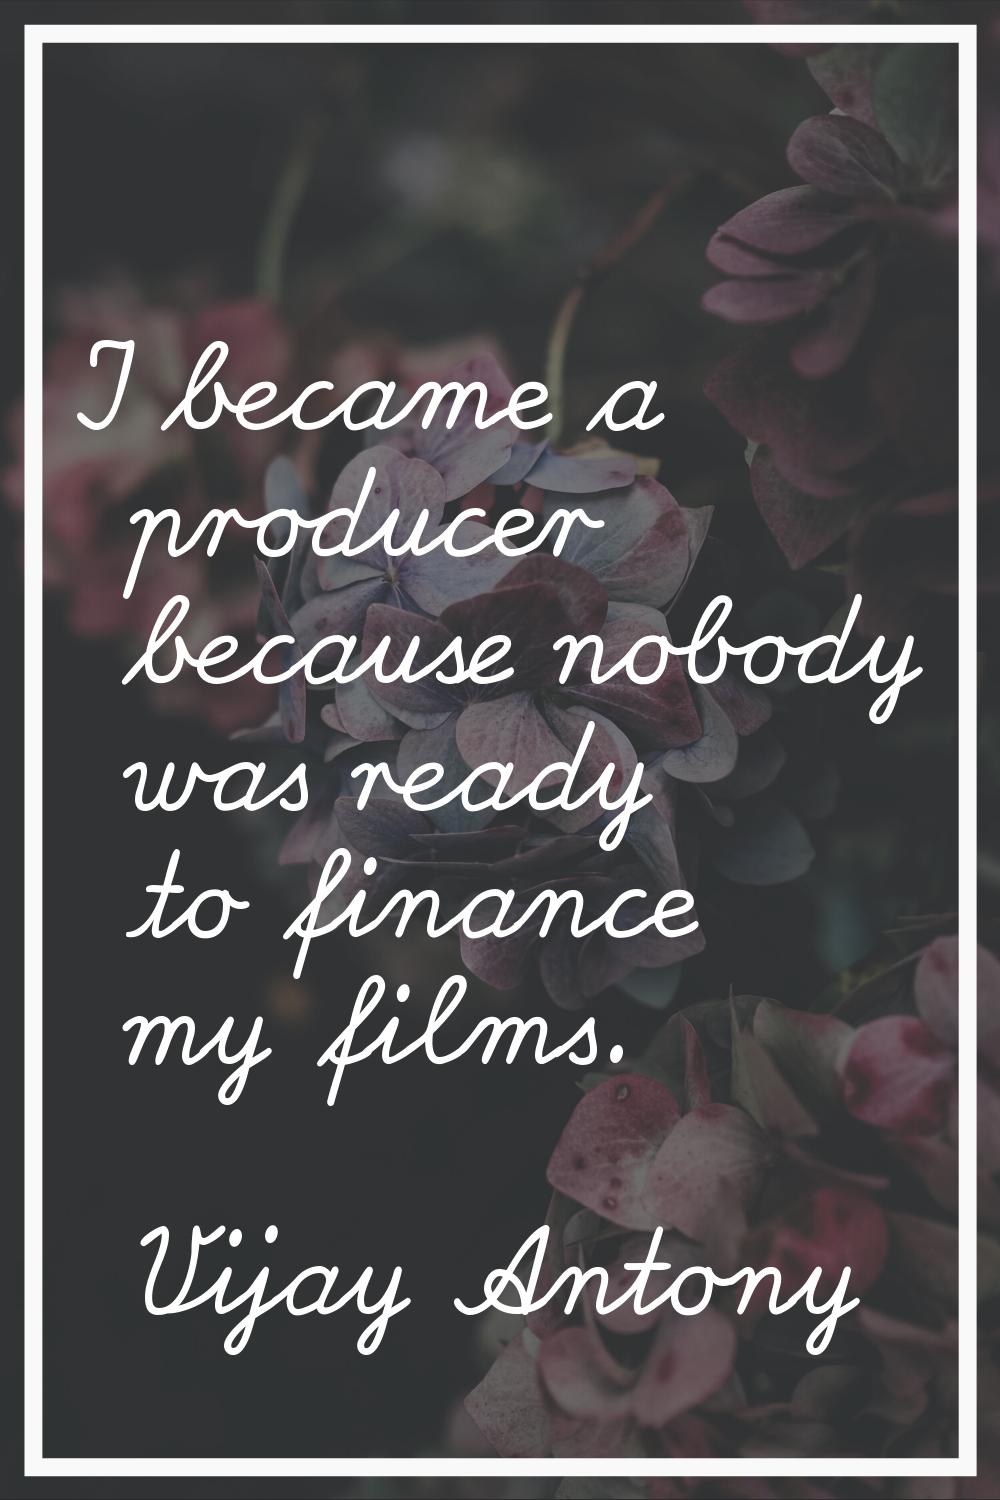 I became a producer because nobody was ready to finance my films.